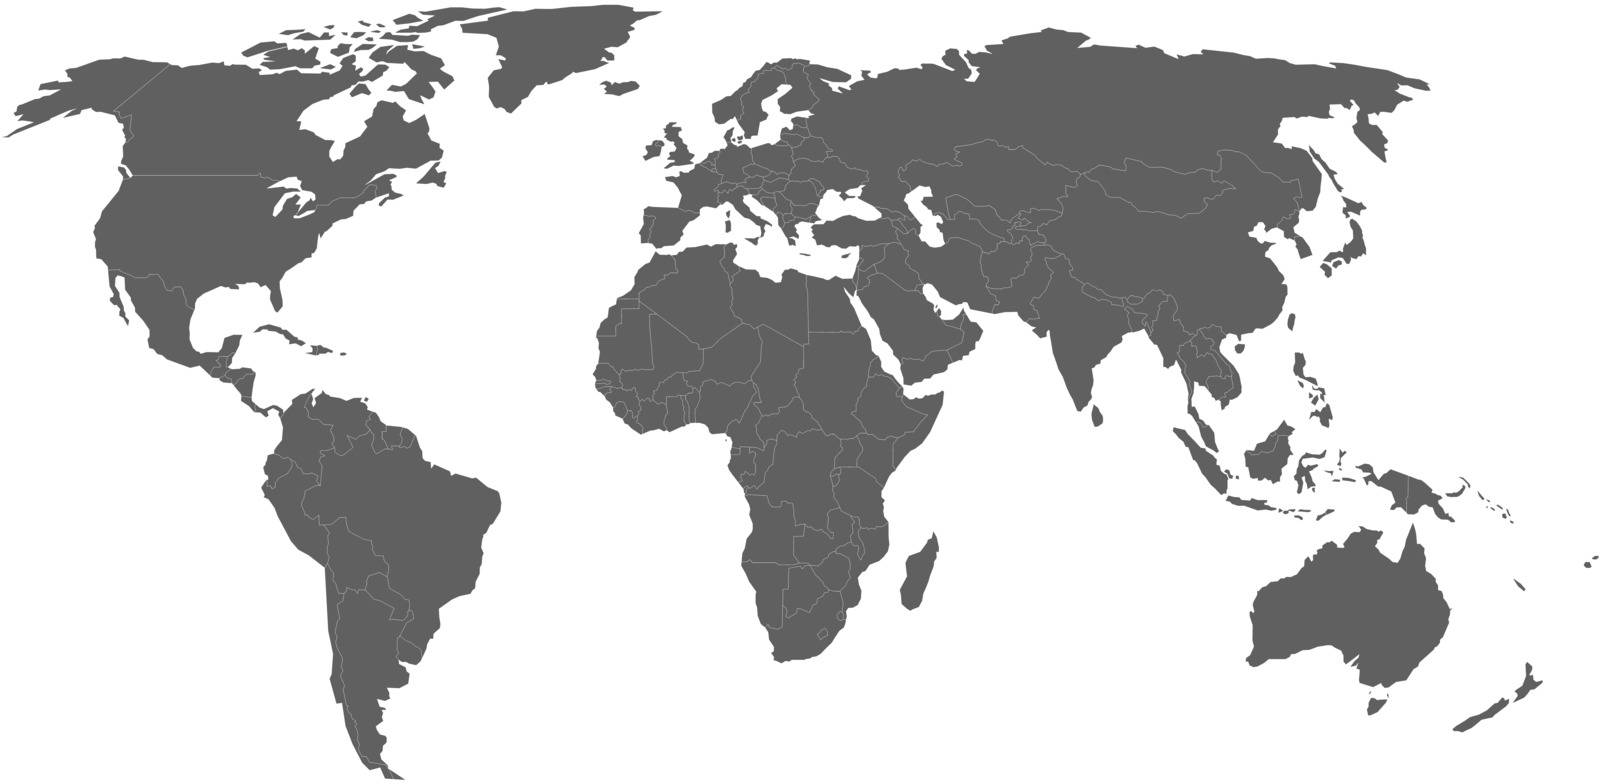 Blank vector world map with sovereign countries and larger dependent territories. Every state is a group of objects in dark grey color with white borders. South Sudan included.